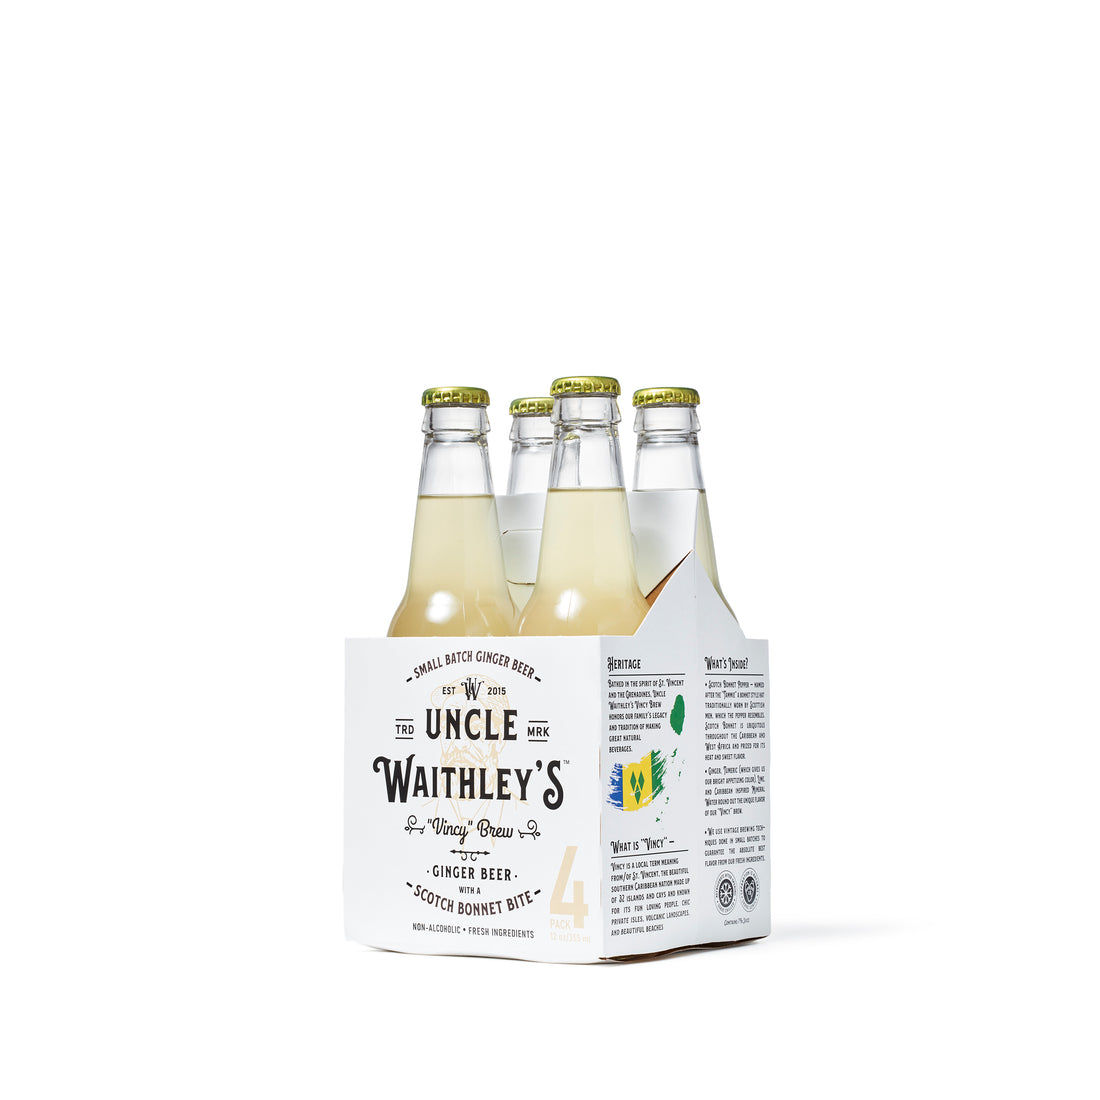 Uncle Waithley's - Ginger Beer with a Scotch Bonnet Bite - Non-Alcoholic - 4 Pack - Boisson — Brooklyn's Non-Alcoholic Spirits, Beer, Wine, and Home Bar Shop in Cobble Hill